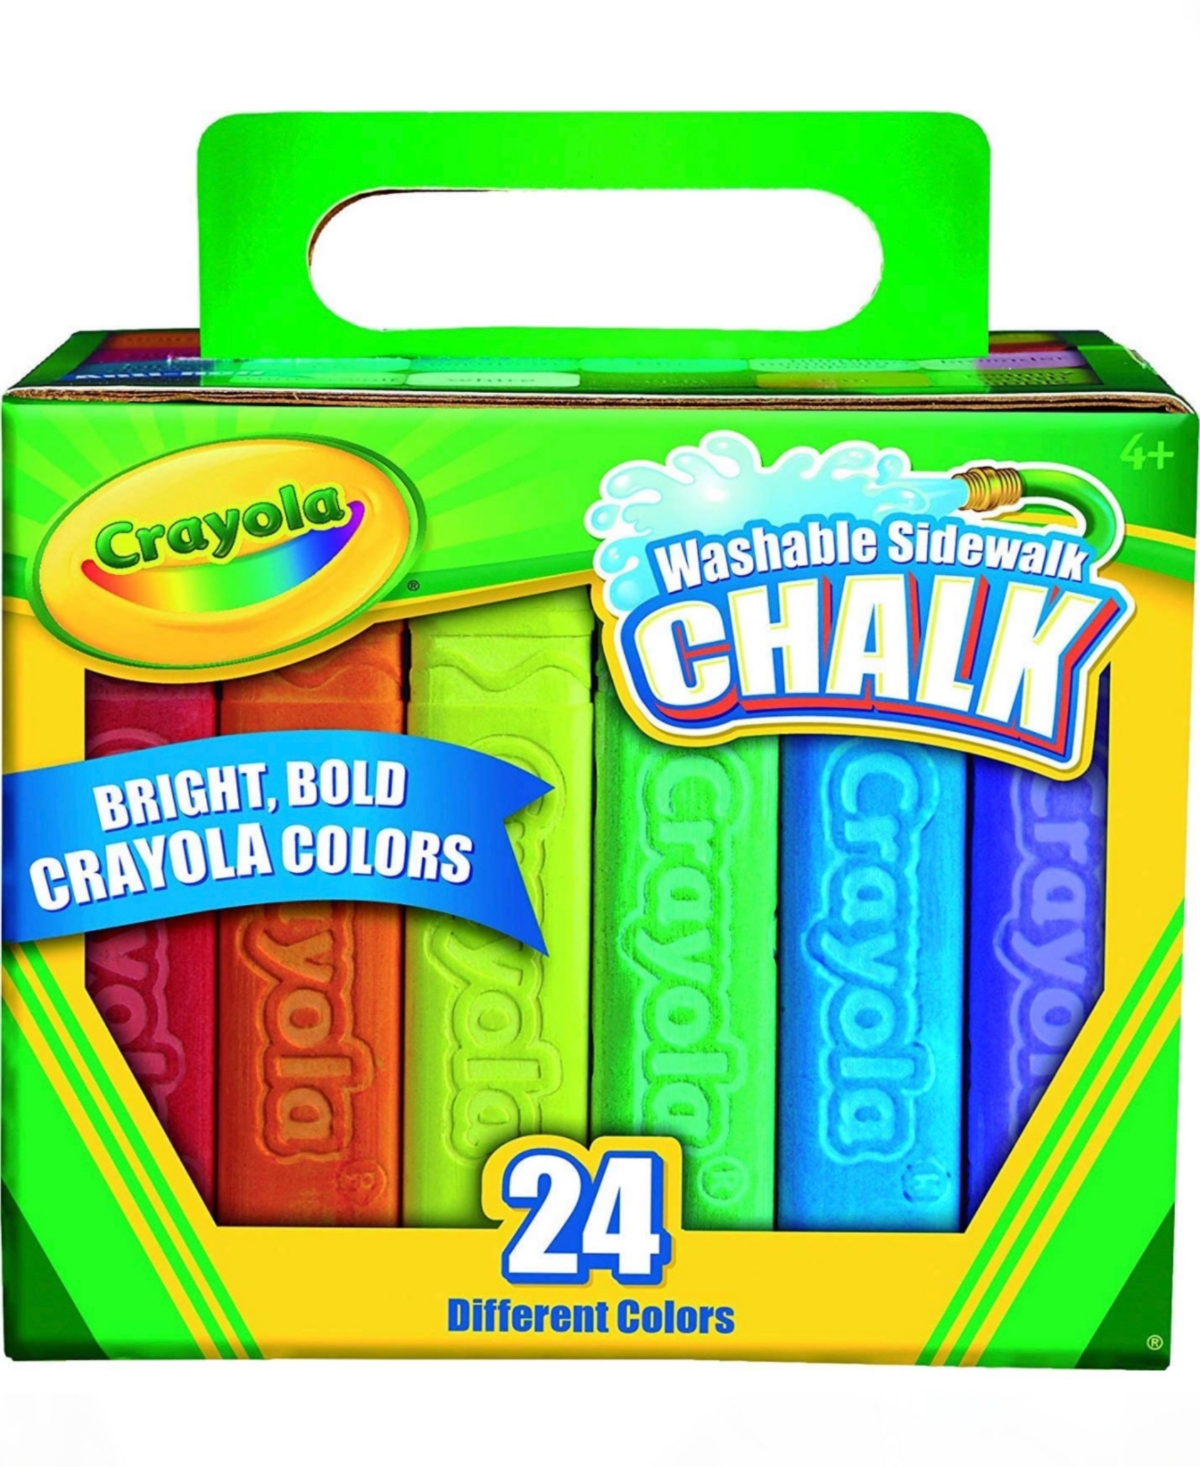 Crayola Washable Sidewalk 24 Count Of Various Colors For Outdoor Play In Multi Colored Plastic